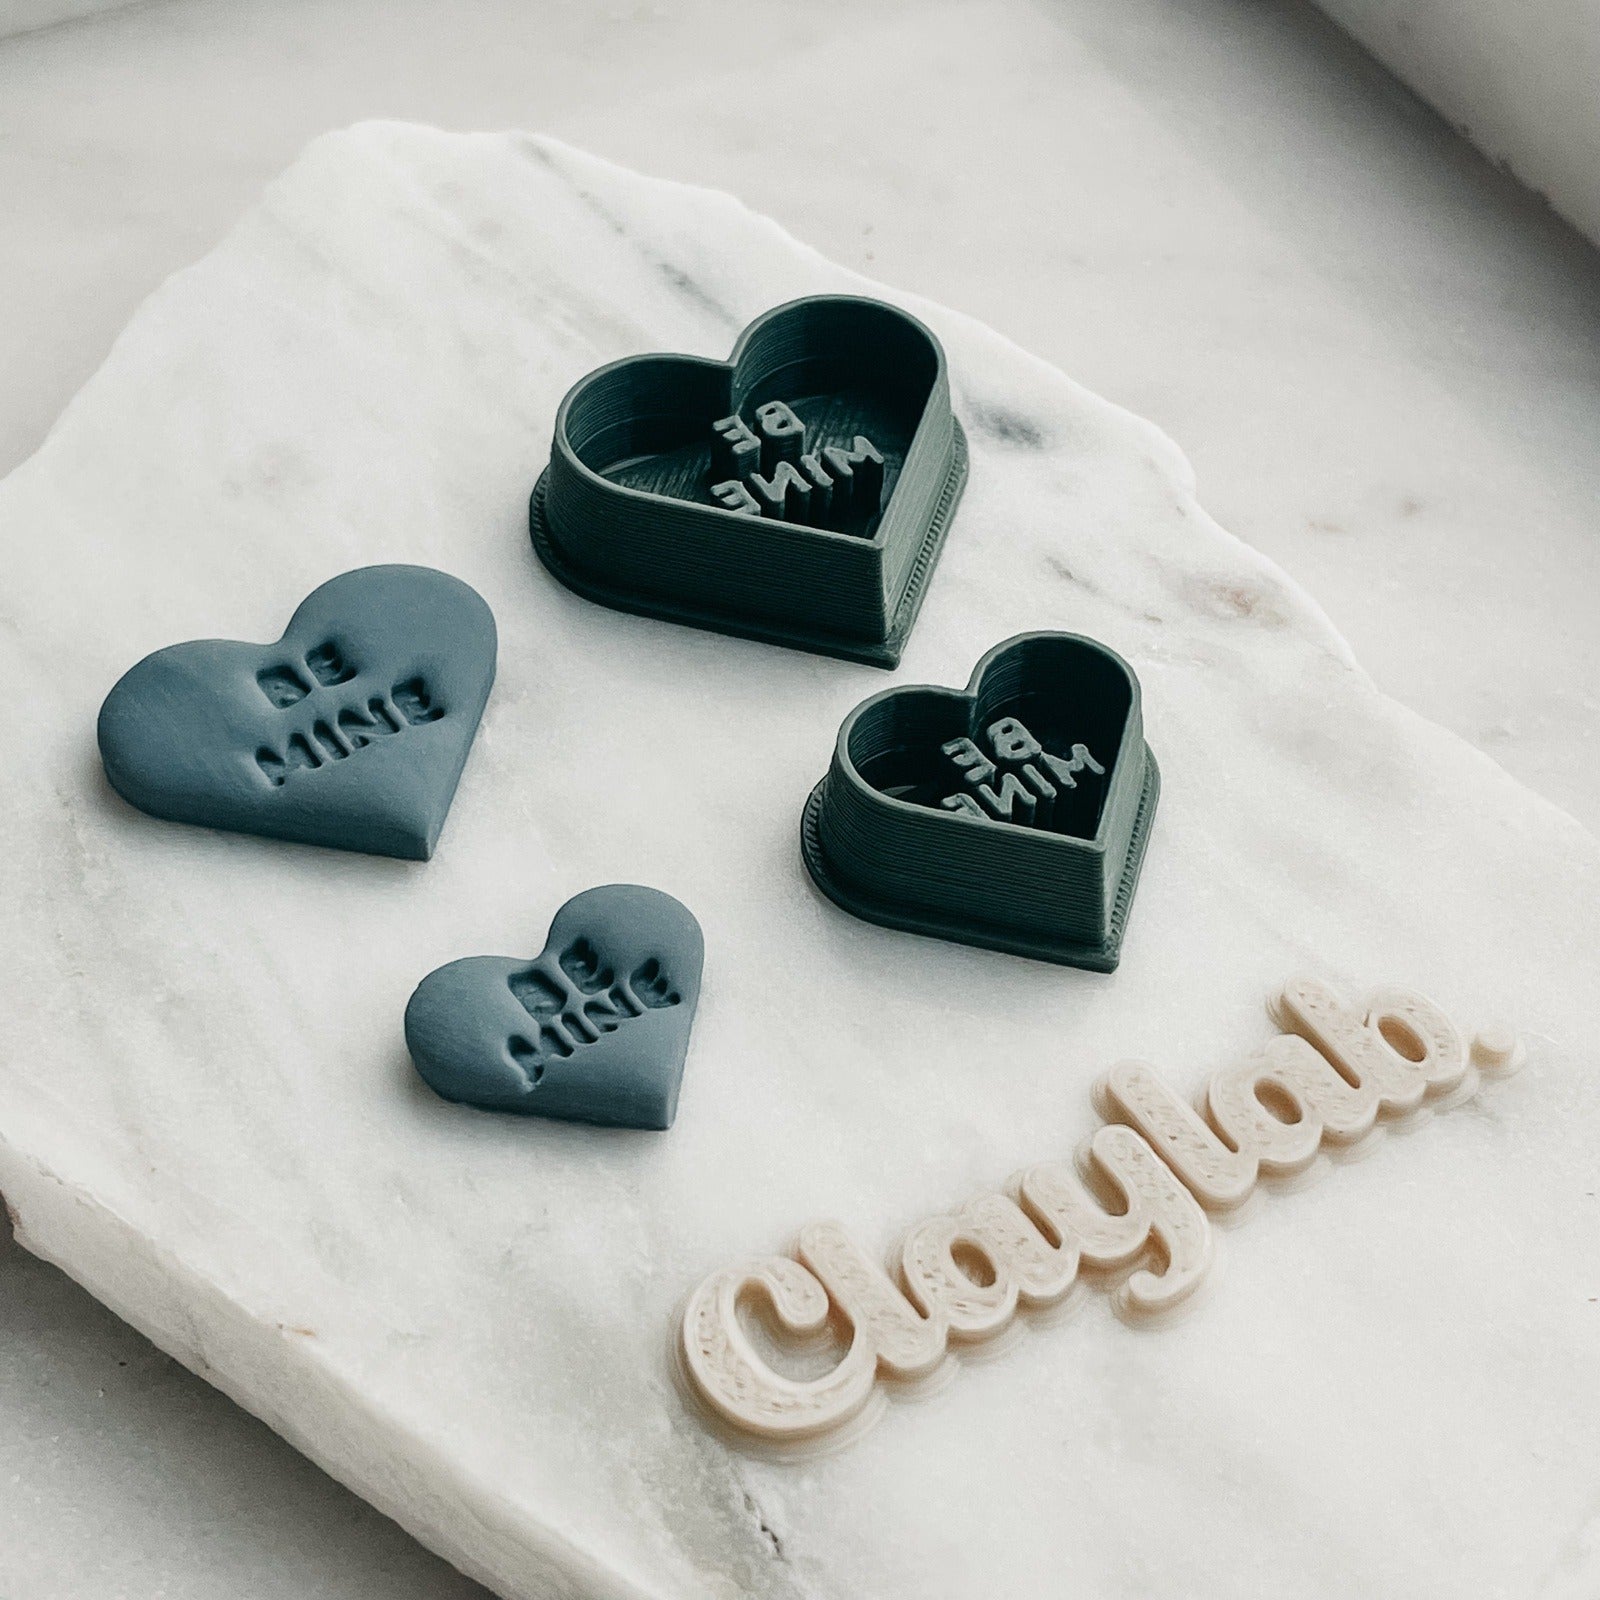 BE MINE Candy Heart Clay Cutter  Claylab Clay Cutters Melbourne